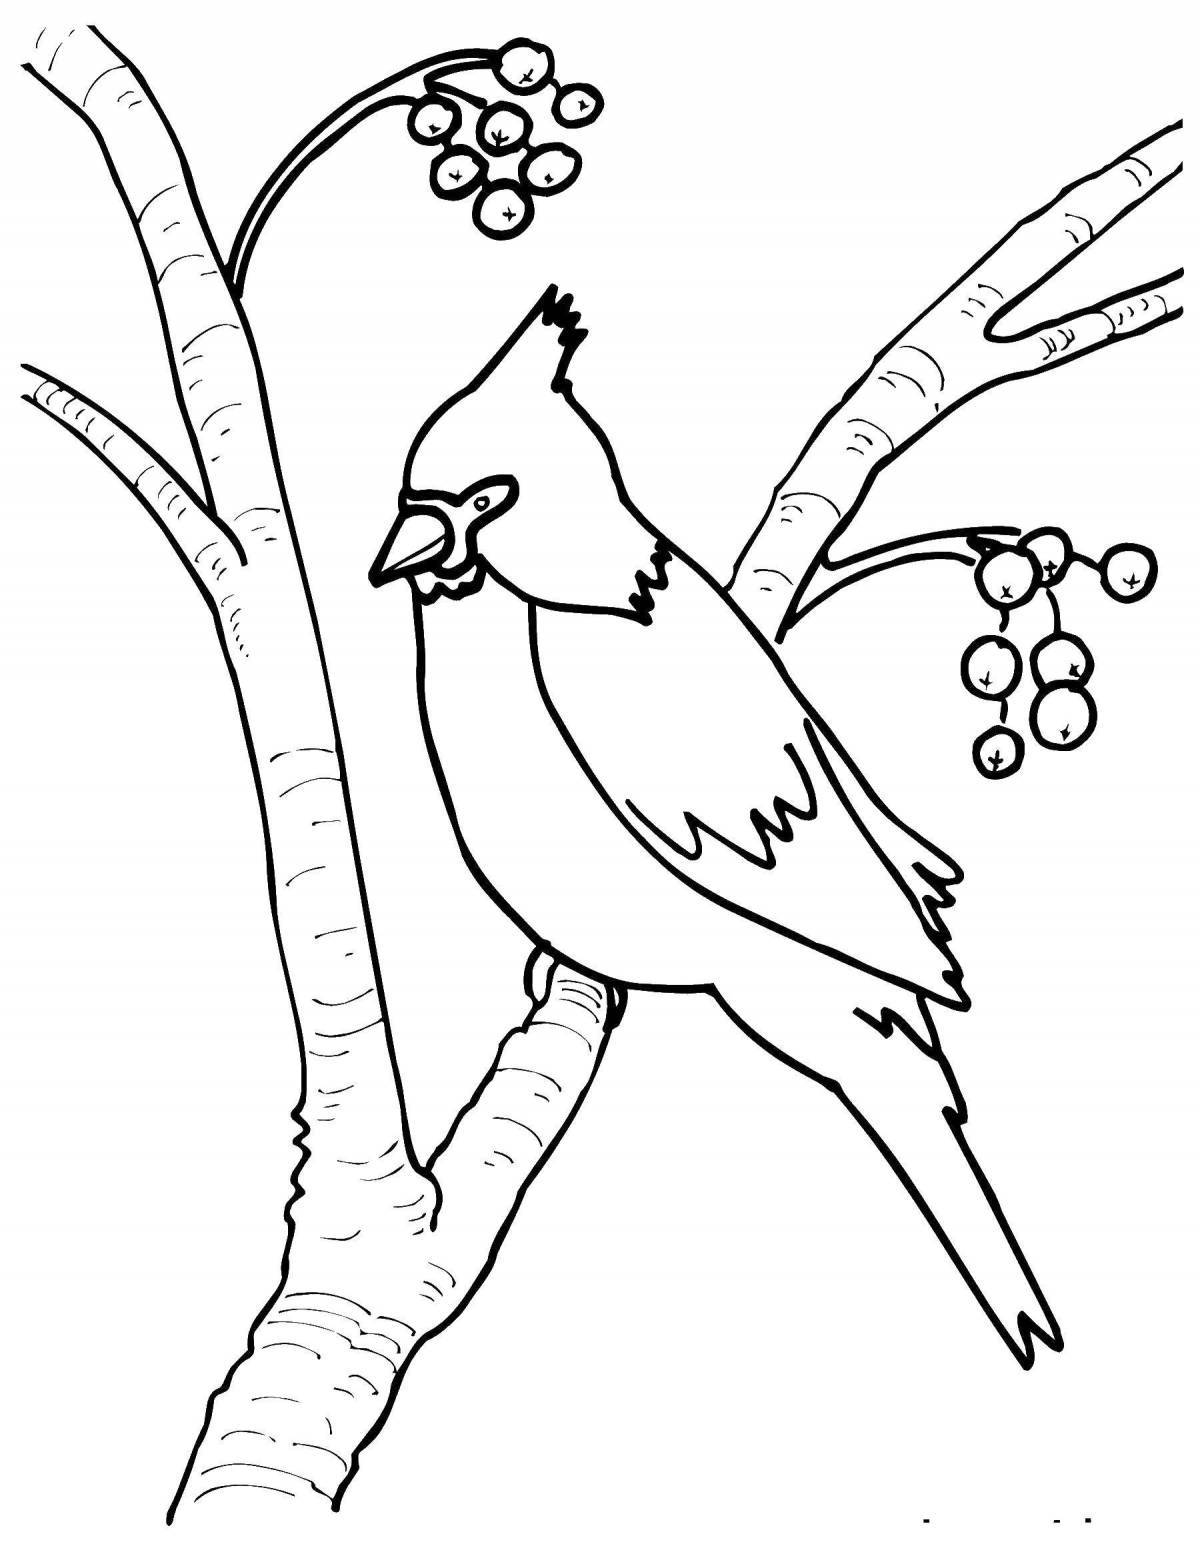 Inspirational winter bird coloring book for 4-5 year olds